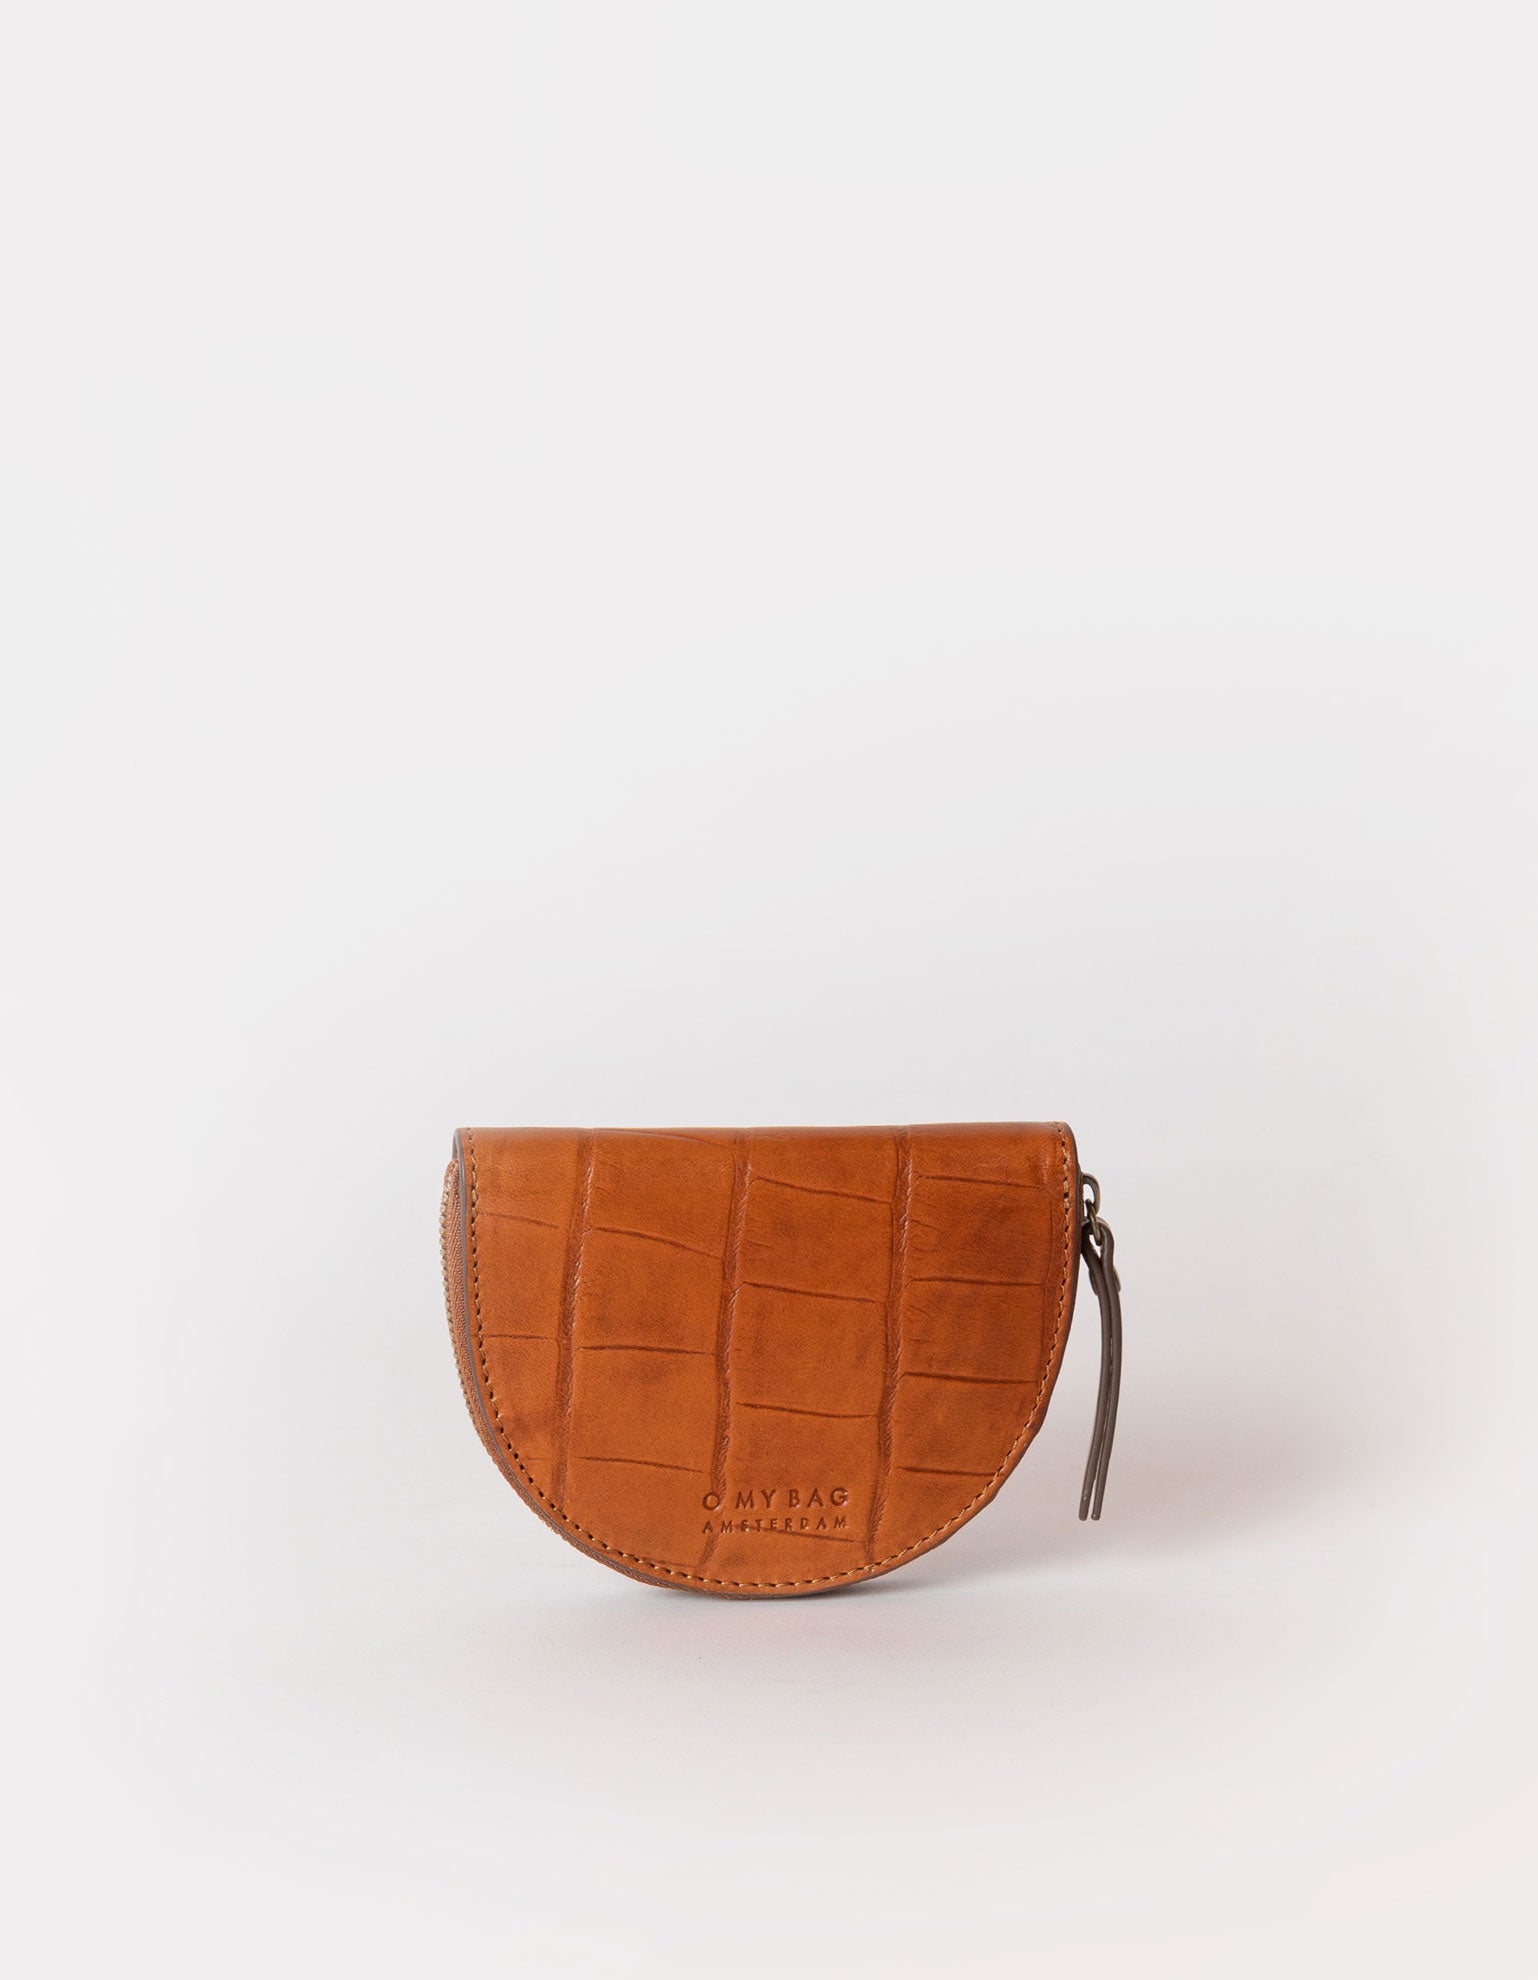 Laura Purse Cognac Classic Croco Leather. Round moon shape coin purse unisex wallet. Front product image.